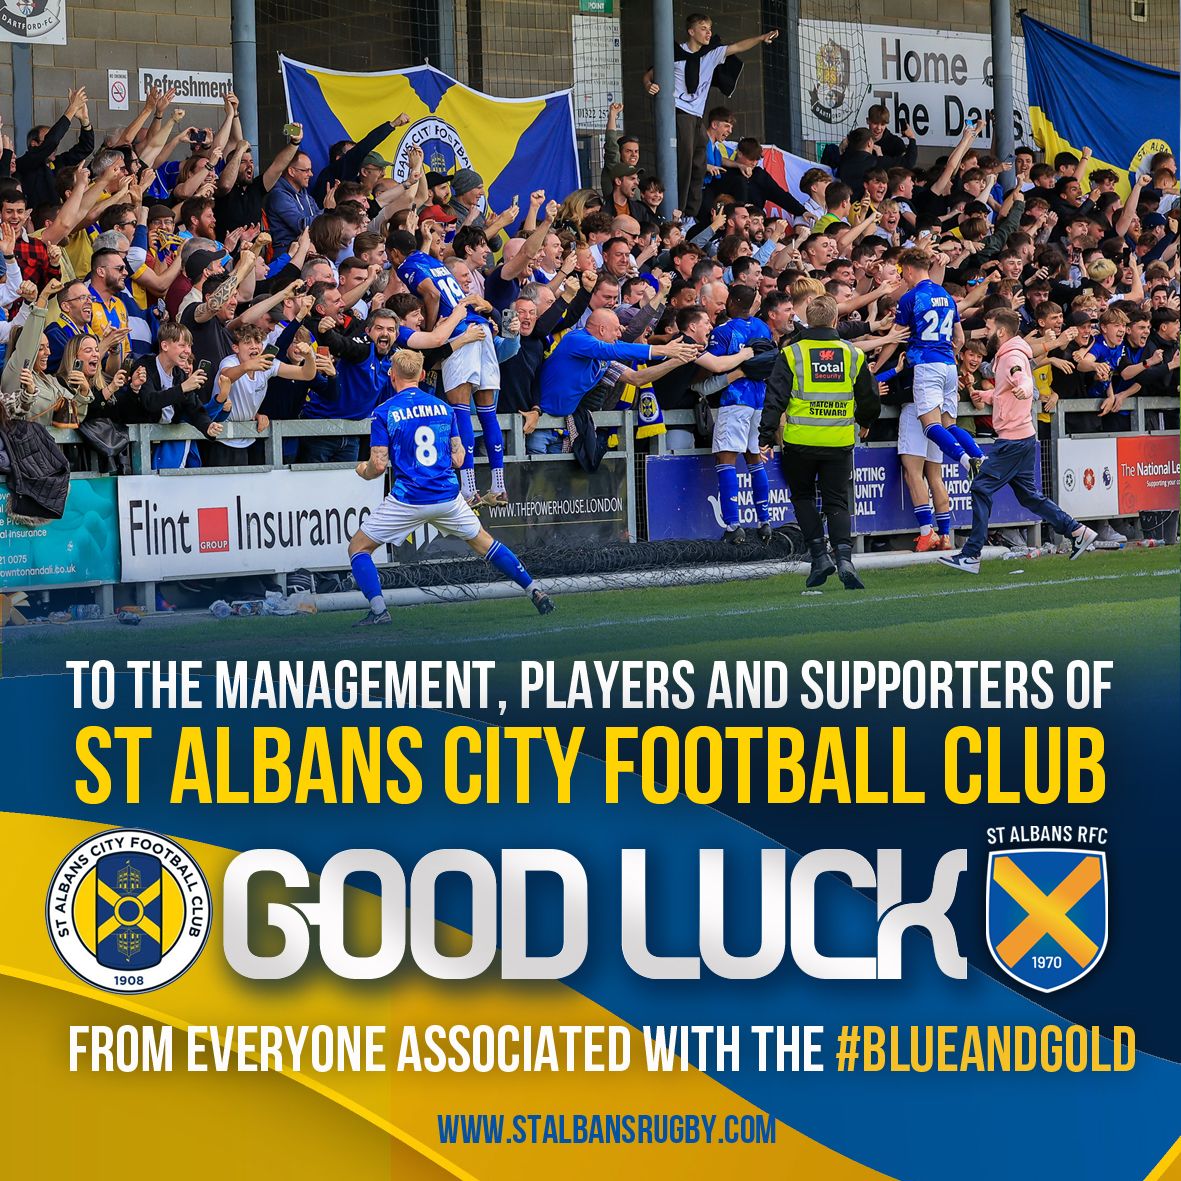 We would like to wish our city neighbours @stalbanscityfc good luck in their play off final @OxCityFC tomorrow. We're all behind you! 🏆 @EmberDesigns @RUready4Wood @NPMetcalfe #stalbans #rugby #hertsrugby #blueandgold